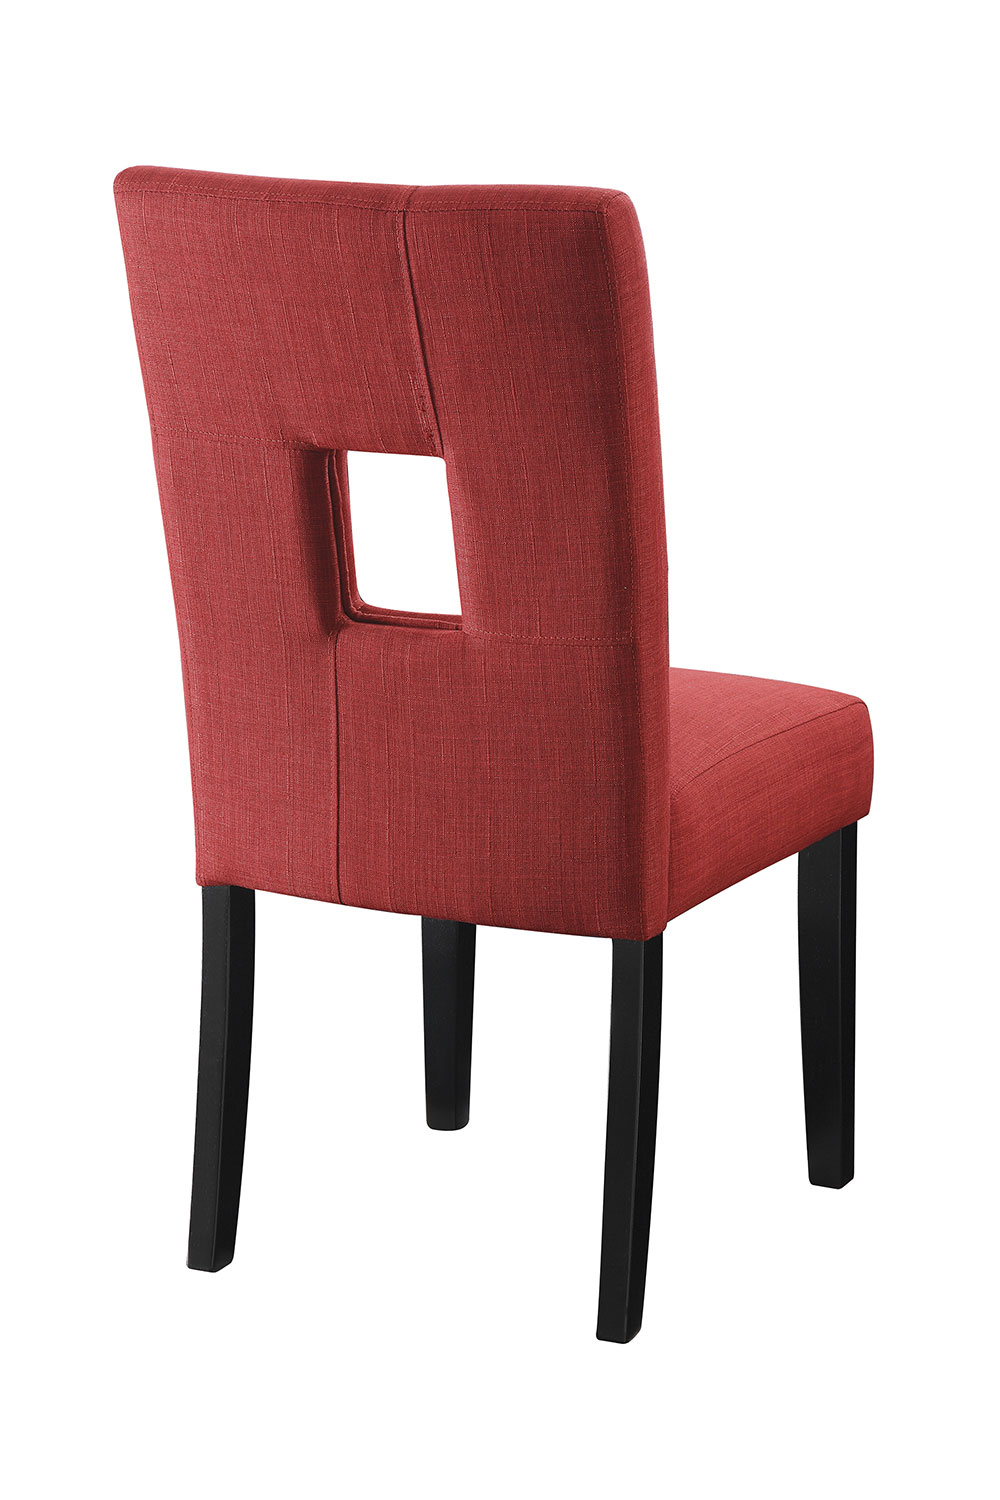 Coaster Andenne Dining Chair - Red/Black